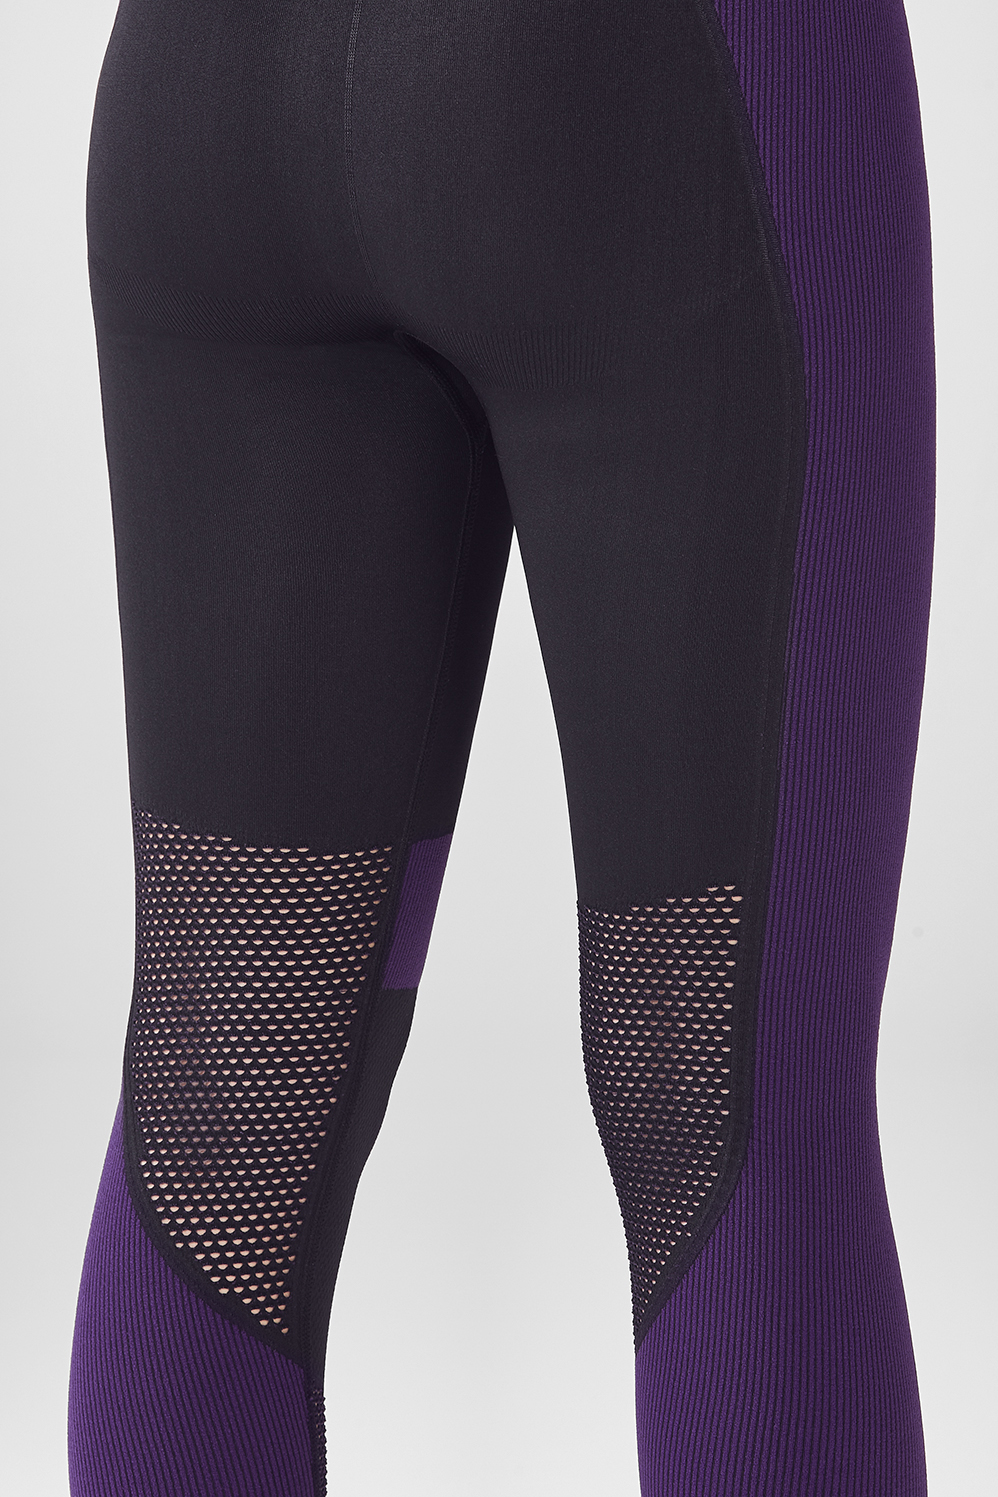 Seamless High-Waisted Statement Legging - - Fabletics Canada